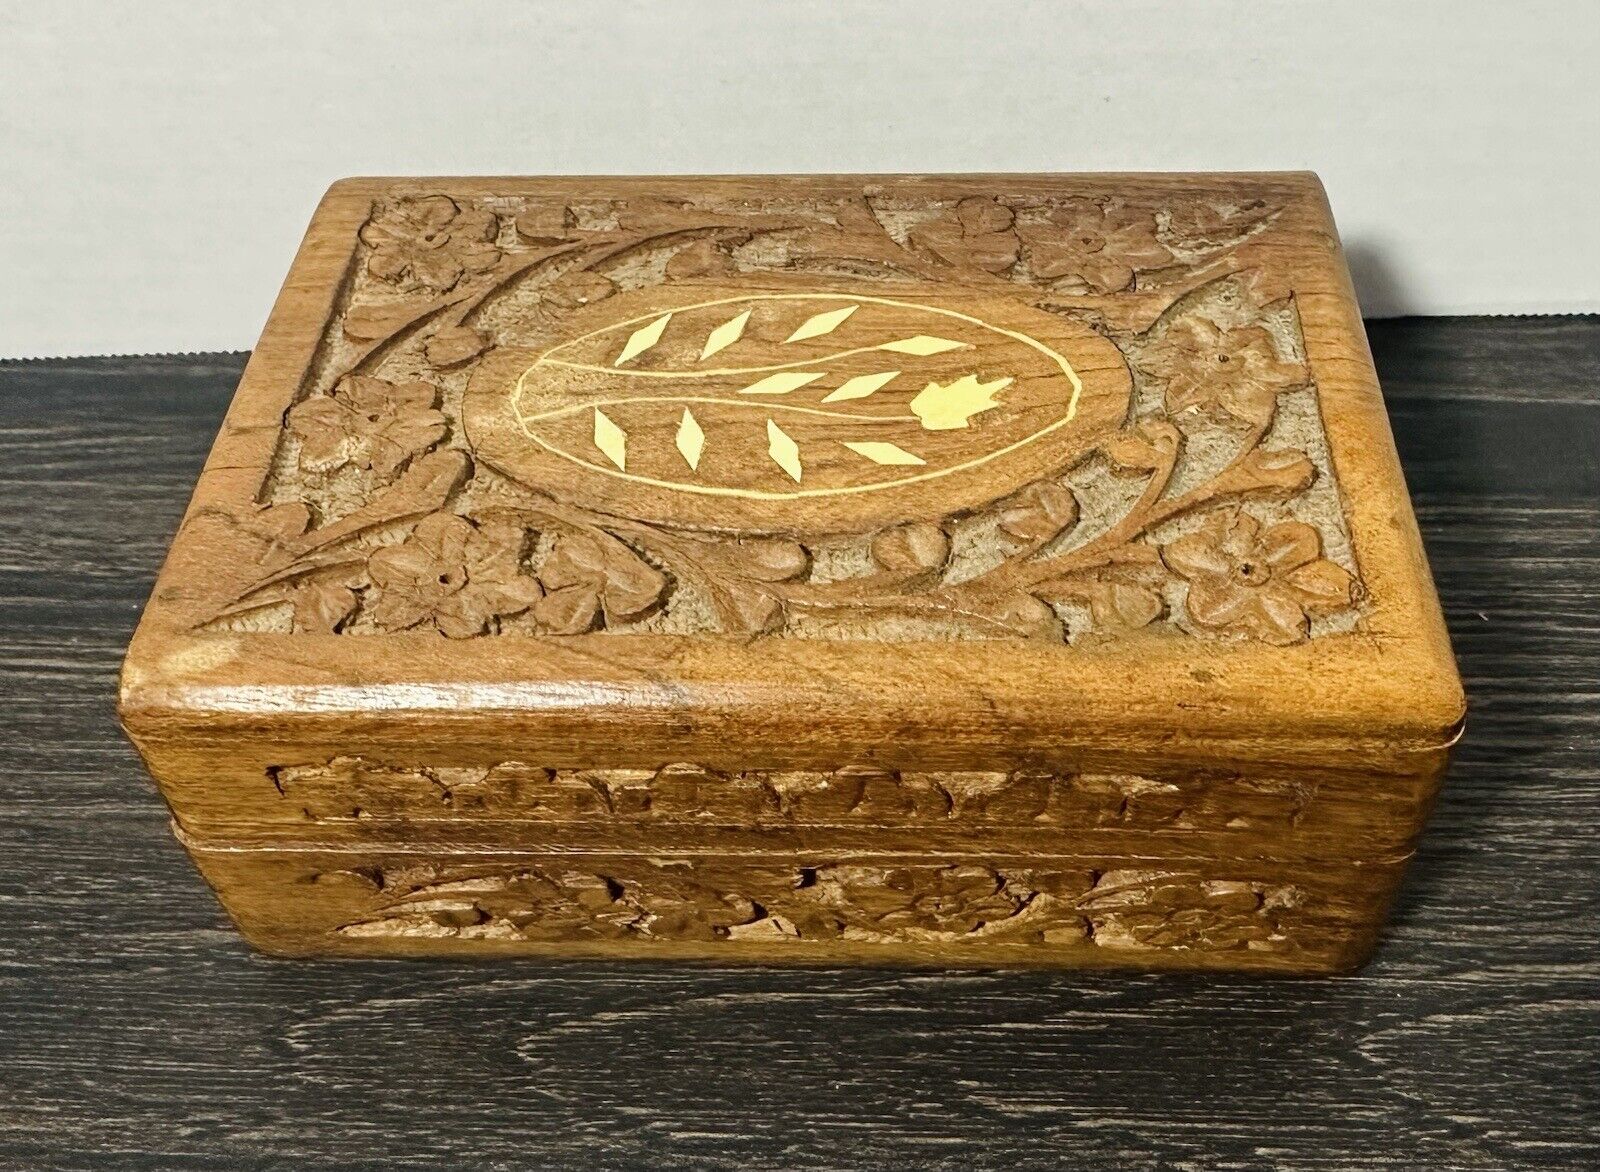 Vintage - Hand Carved - Teak Wooden Jewelry/Trinket Box - Made in India